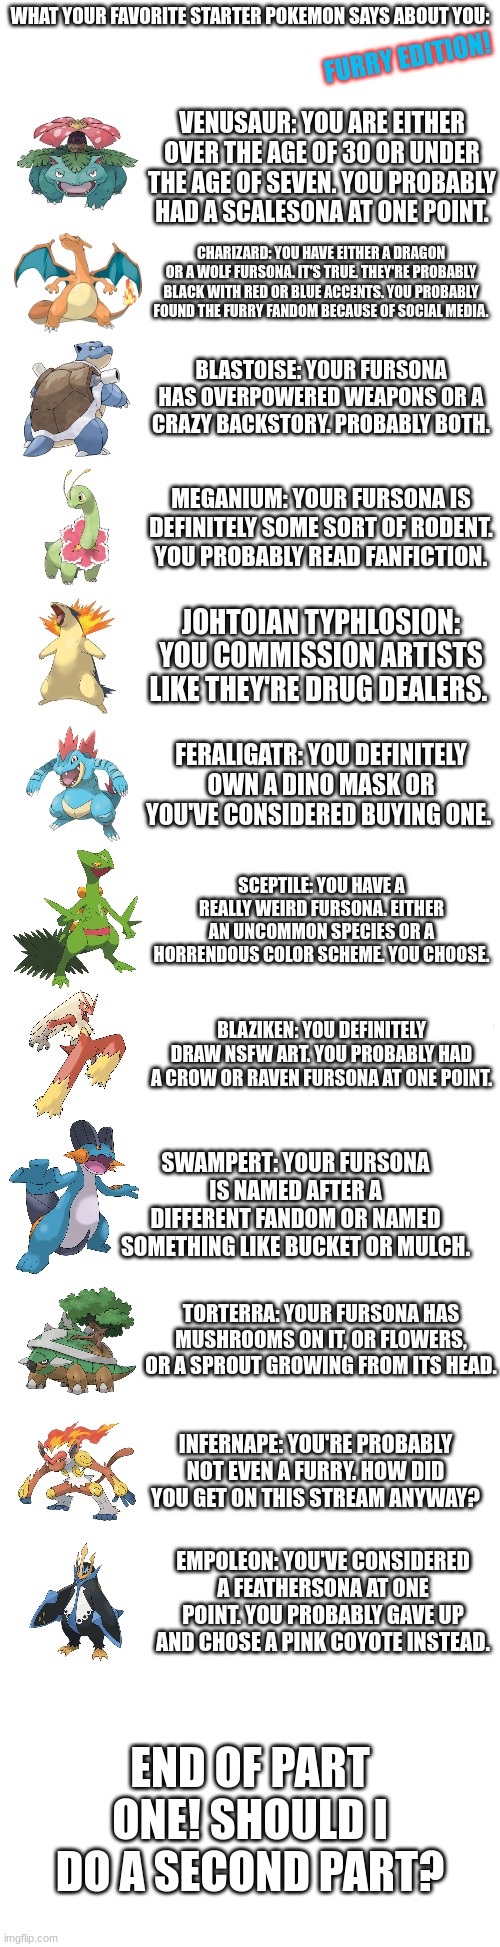 I speak the truth. All art belongs to Nintendo! Tag yourself in the comments! Should I do a part two? | WHAT YOUR FAVORITE STARTER POKEMON SAYS ABOUT YOU:; FURRY EDITION! VENUSAUR: YOU ARE EITHER OVER THE AGE OF 30 OR UNDER THE AGE OF SEVEN. YOU PROBABLY HAD A SCALESONA AT ONE POINT. CHARIZARD: YOU HAVE EITHER A DRAGON OR A WOLF FURSONA. IT'S TRUE. THEY'RE PROBABLY BLACK WITH RED OR BLUE ACCENTS. YOU PROBABLY FOUND THE FURRY FANDOM BECAUSE OF SOCIAL MEDIA. BLASTOISE: YOUR FURSONA HAS OVERPOWERED WEAPONS OR A CRAZY BACKSTORY. PROBABLY BOTH. MEGANIUM: YOUR FURSONA IS DEFINITELY SOME SORT OF RODENT. YOU PROBABLY READ FANFICTION. JOHTOIAN TYPHLOSION: YOU COMMISSION ARTISTS LIKE THEY'RE DRUG DEALERS. FERALIGATR: YOU DEFINITELY OWN A DINO MASK OR YOU'VE CONSIDERED BUYING ONE. SCEPTILE: YOU HAVE A REALLY WEIRD FURSONA. EITHER AN UNCOMMON SPECIES OR A HORRENDOUS COLOR SCHEME. YOU CHOOSE. BLAZIKEN: YOU DEFINITELY DRAW NSFW ART. YOU PROBABLY HAD A CROW OR RAVEN FURSONA AT ONE POINT. SWAMPERT: YOUR FURSONA IS NAMED AFTER A DIFFERENT FANDOM OR NAMED SOMETHING LIKE BUCKET OR MULCH. TORTERRA: YOUR FURSONA HAS MUSHROOMS ON IT, OR FLOWERS, OR A SPROUT GROWING FROM ITS HEAD. INFERNAPE: YOU'RE PROBABLY NOT EVEN A FURRY. HOW DID YOU GET ON THIS STREAM ANYWAY? EMPOLEON: YOU'VE CONSIDERED A FEATHERSONA AT ONE POINT. YOU PROBABLY GAVE UP AND CHOSE A PINK COYOTE INSTEAD. END OF PART ONE! SHOULD I DO A SECOND PART? | image tagged in long blank white | made w/ Imgflip meme maker